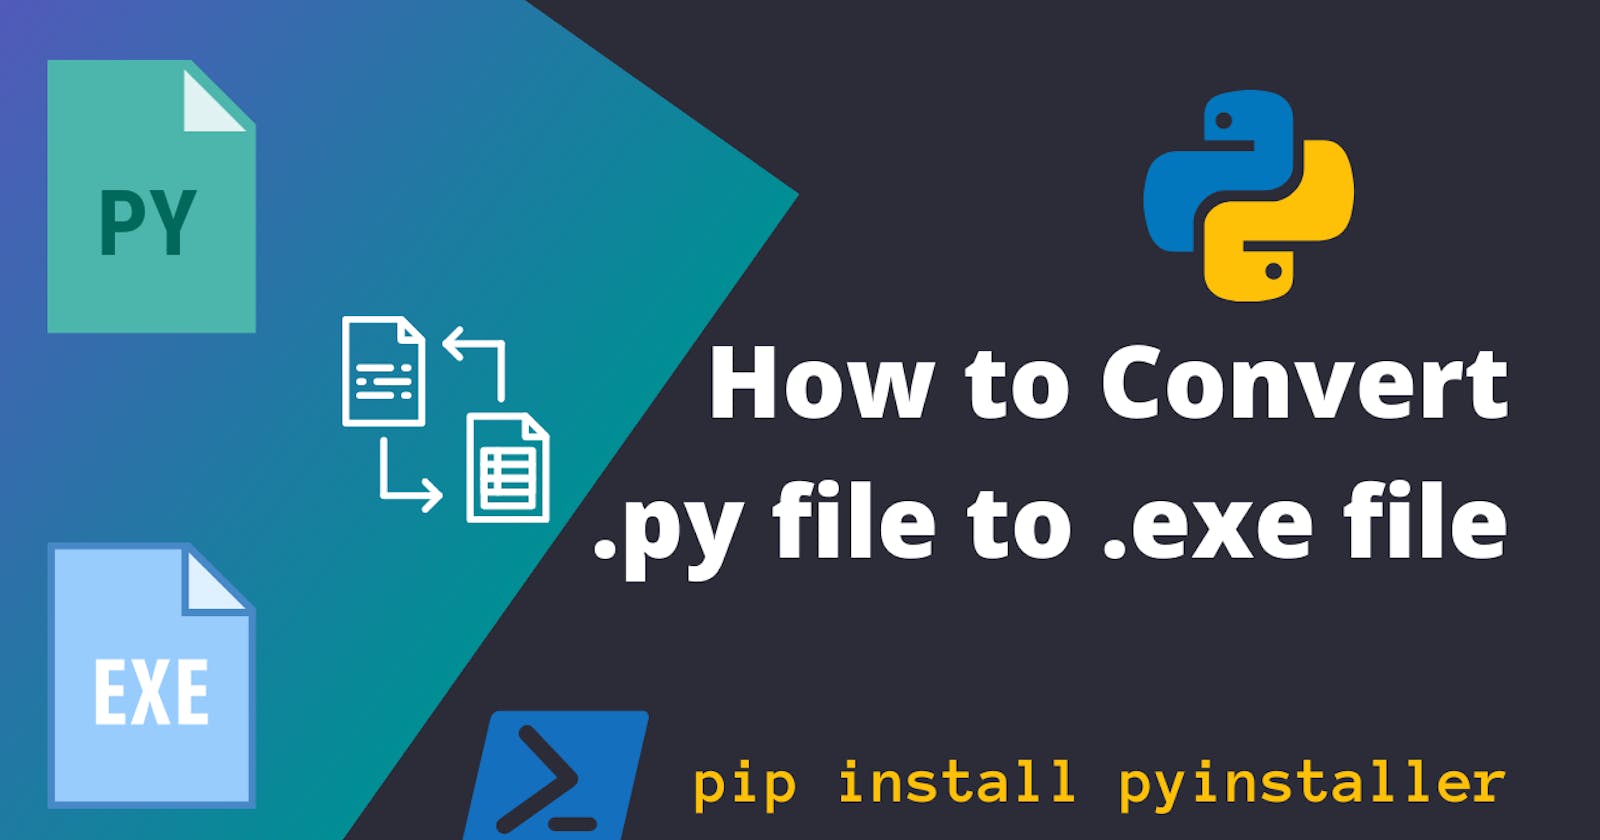 Convert .py file to .exe file